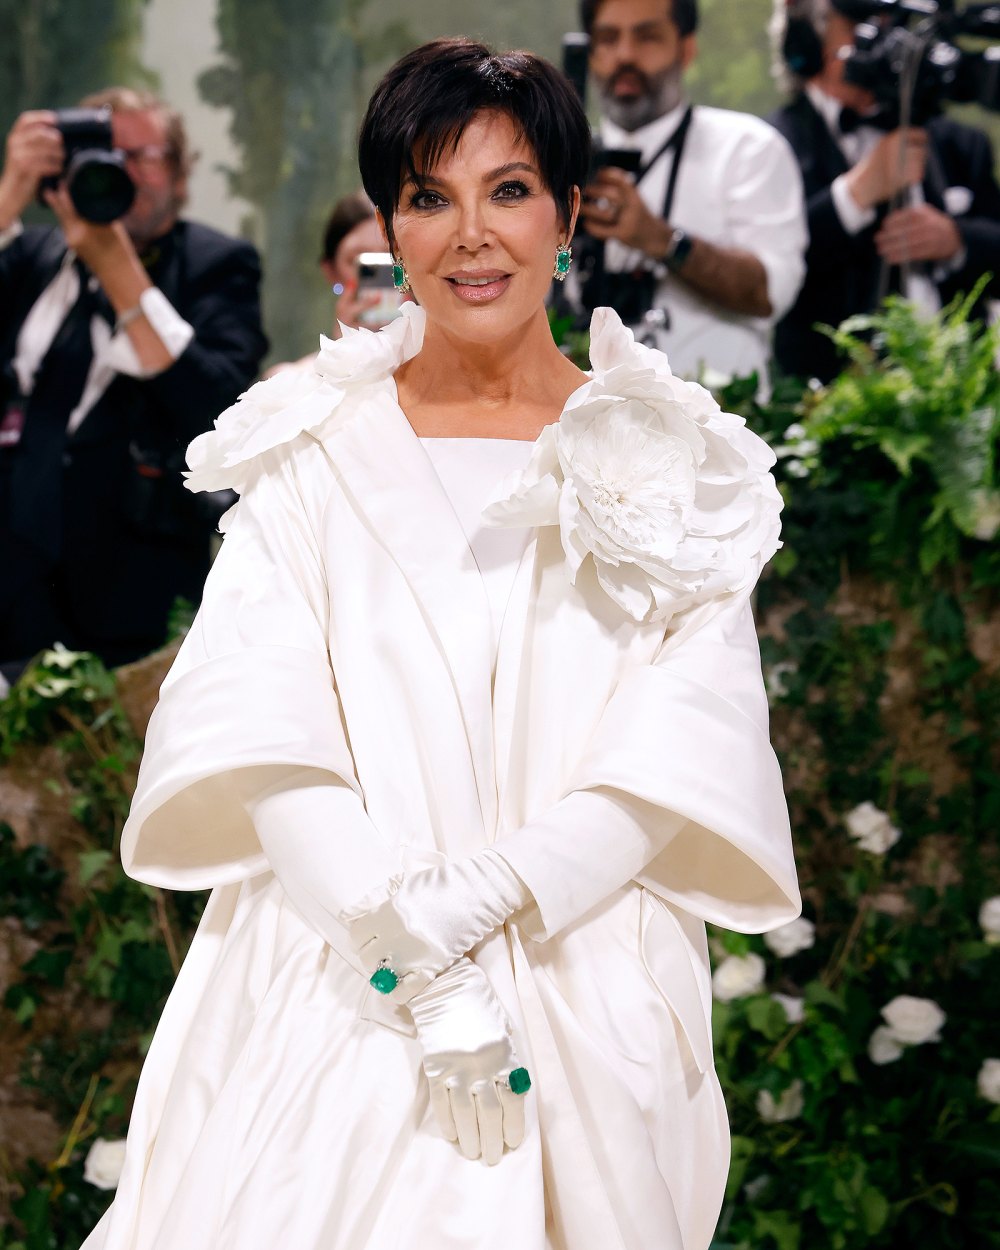 Kris Jenner Cries About Having Her Ovaries Removed Due to a Tumor, Hints at More Health Issues